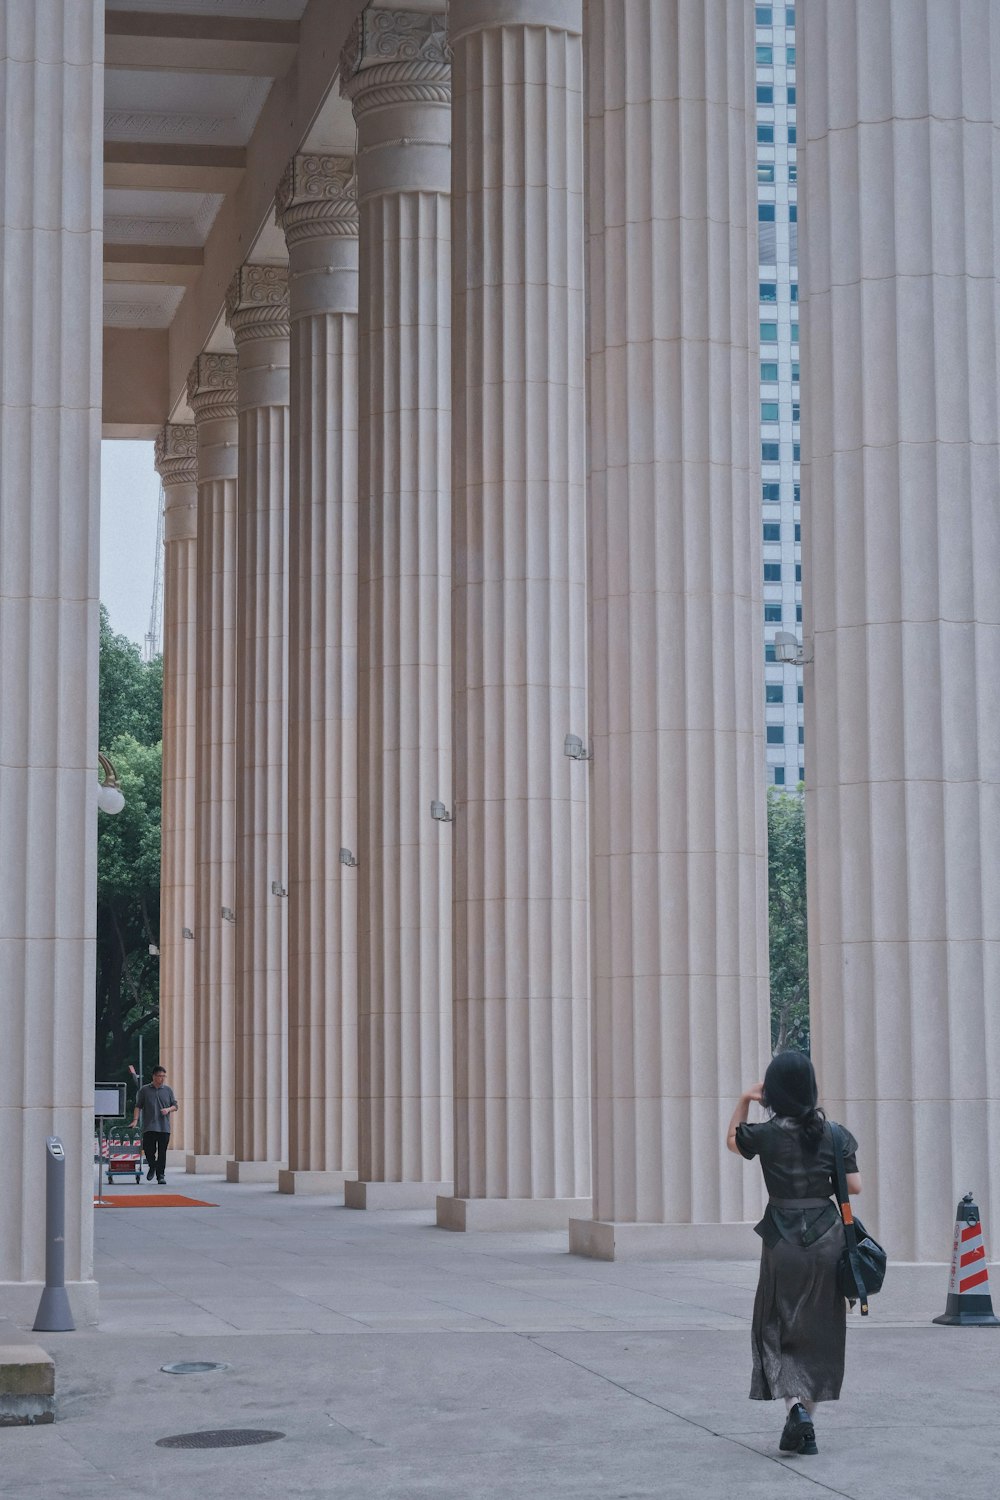 a woman in a long dress is standing in front of columns